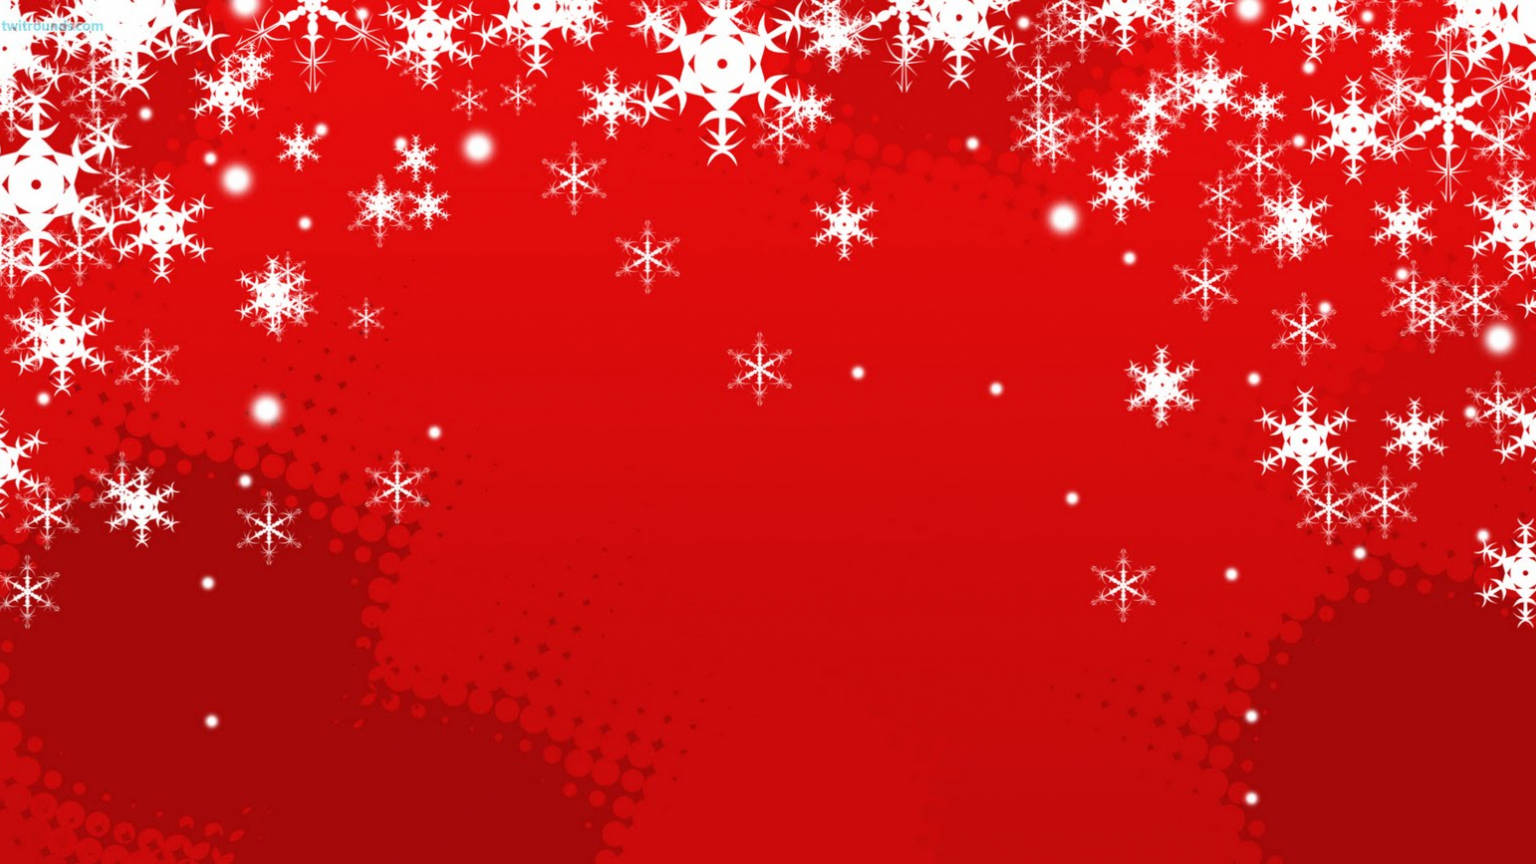 Sparkly Snowflakes Red Christmas Background Wallpaper